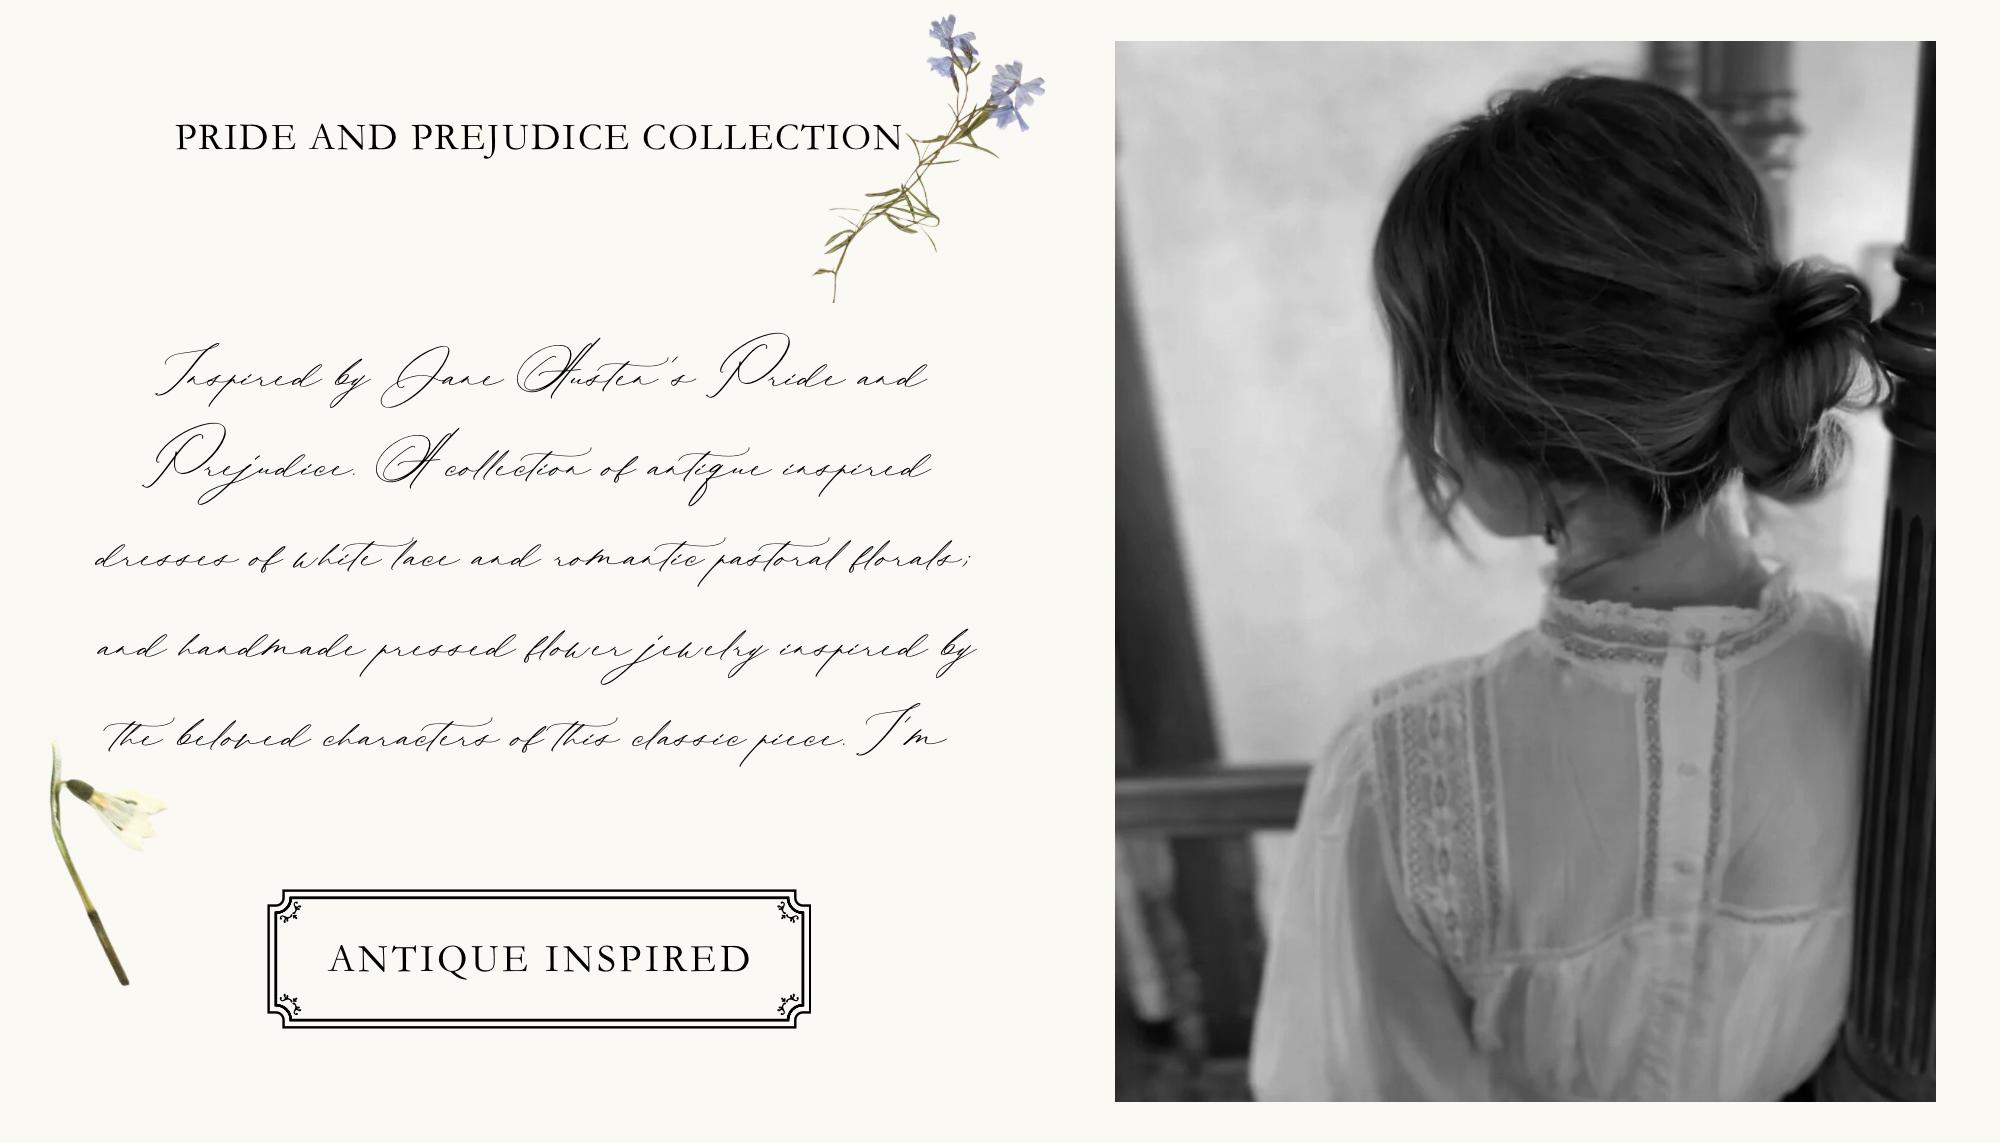 The Pride and Prejudice Collection